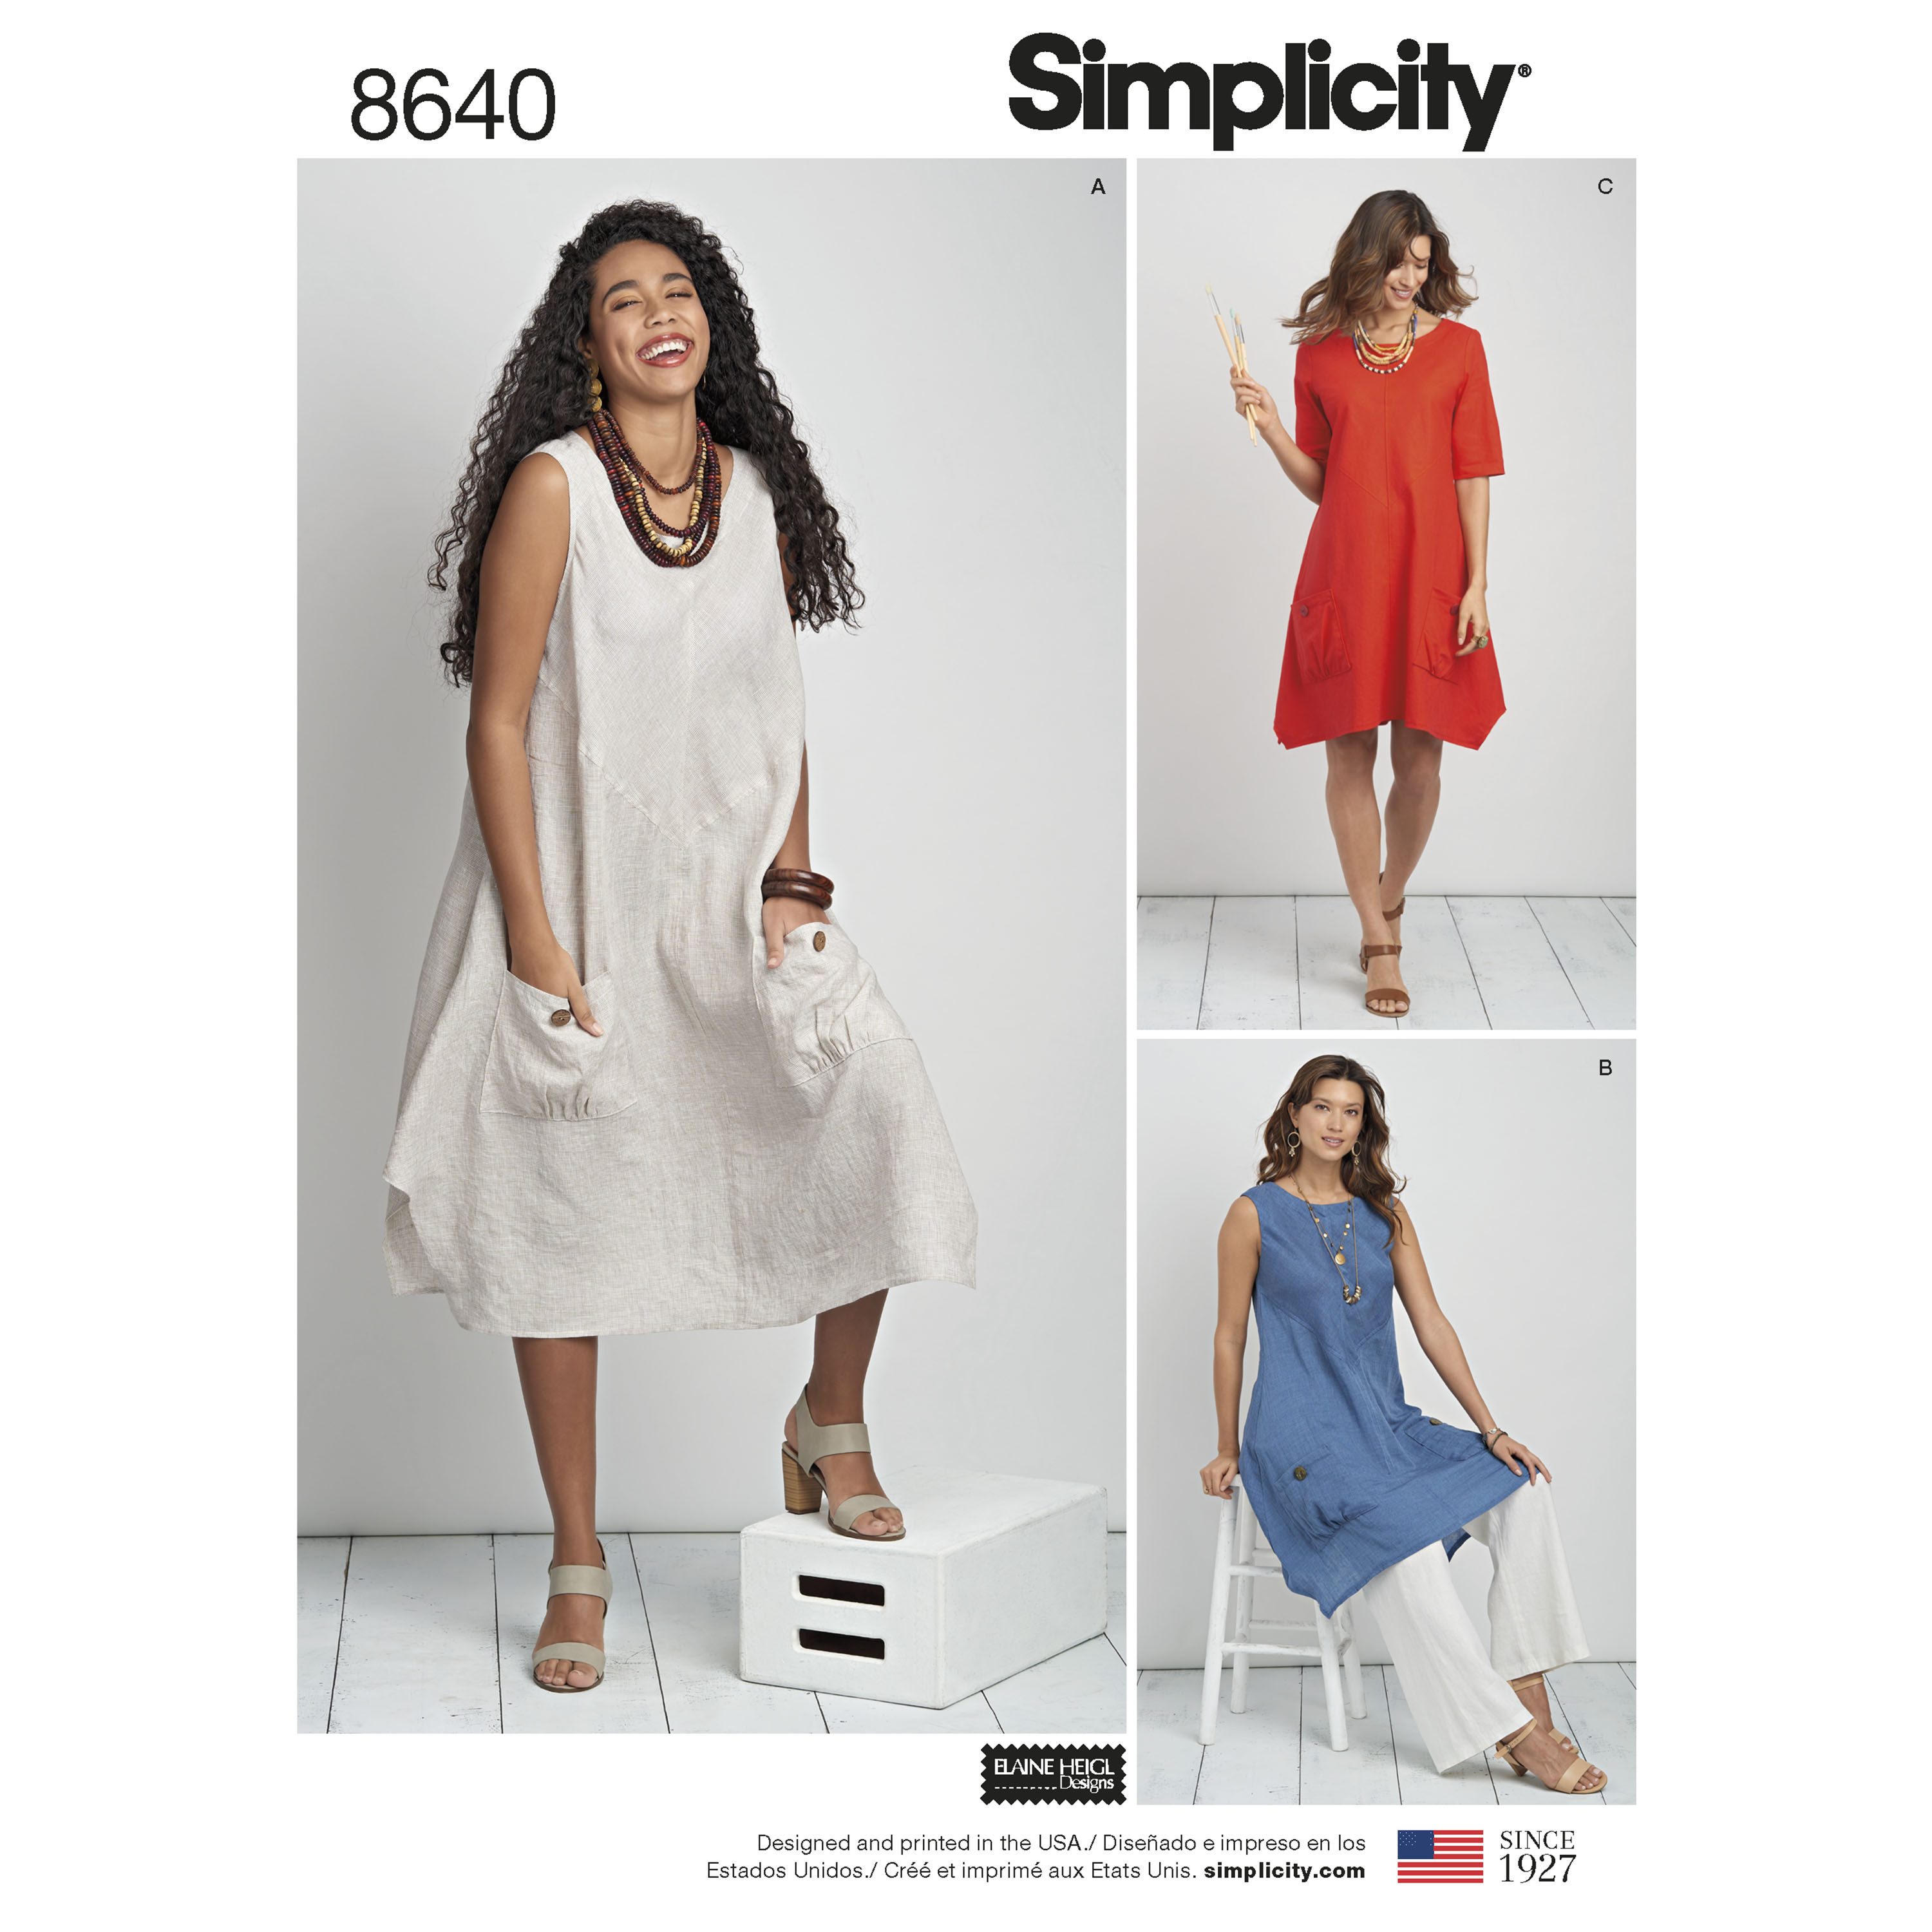 Simplicity 8640 Misses'/Women's Dress or Tunic